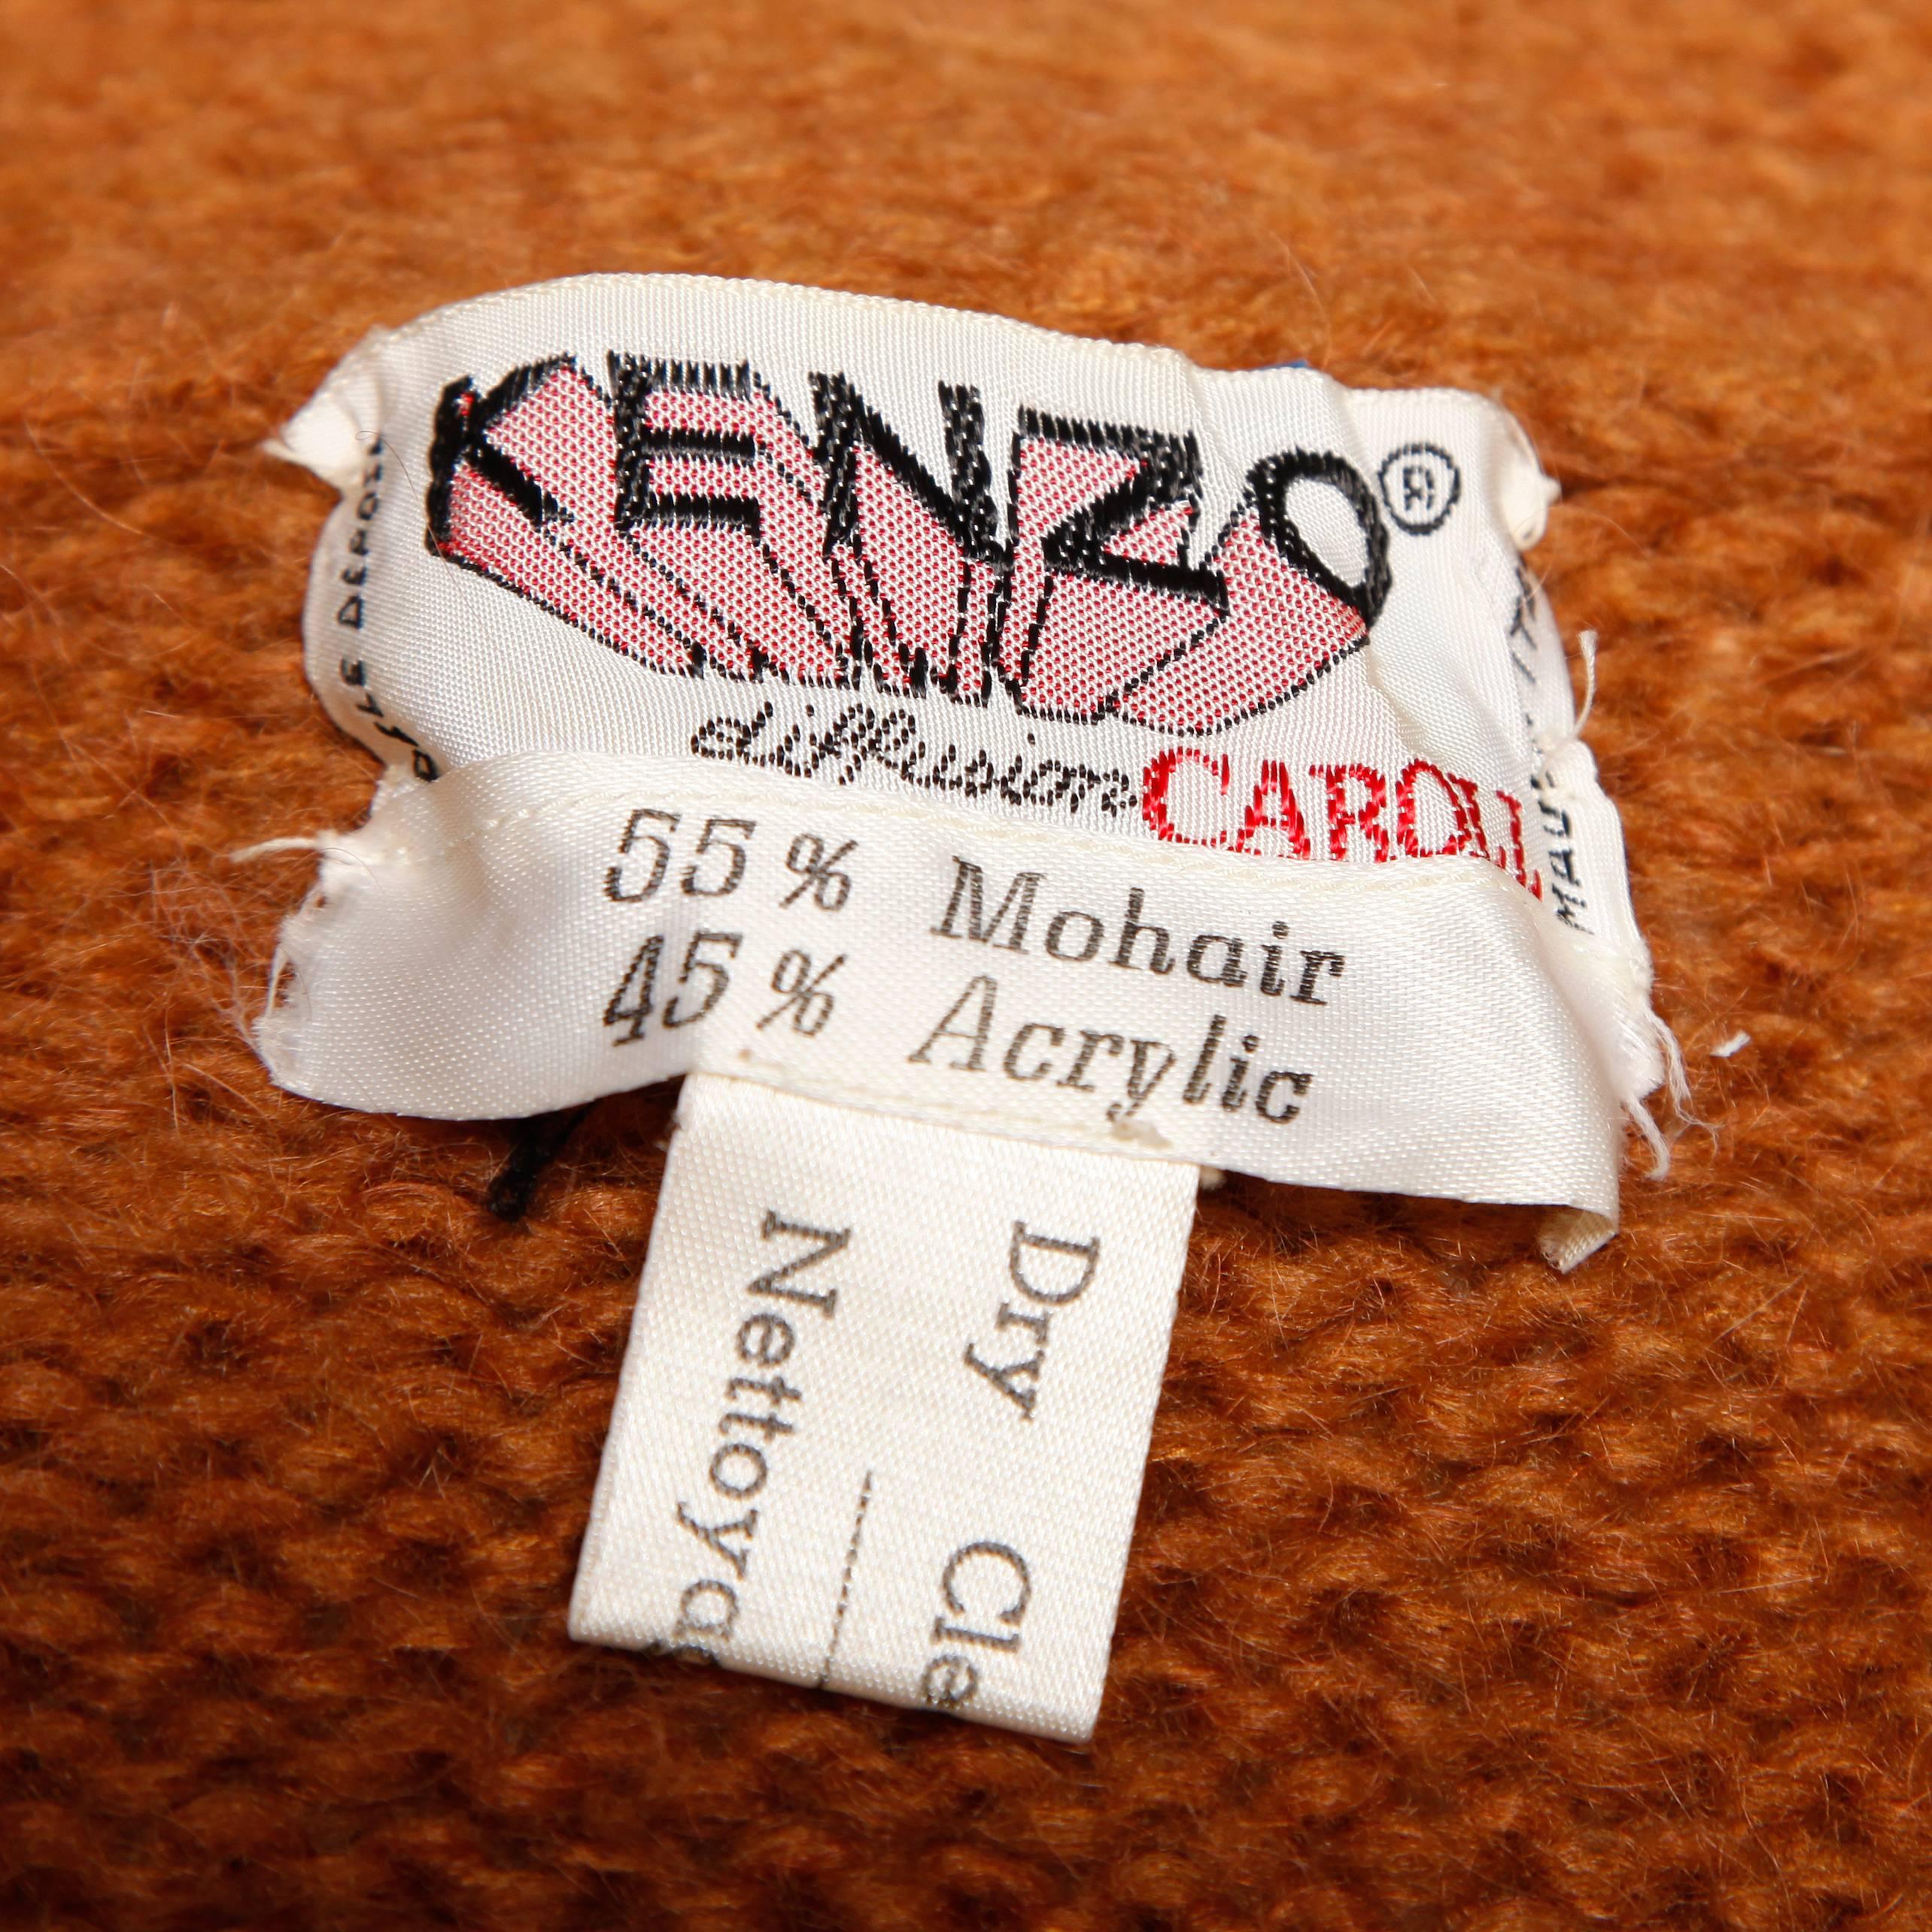 Amazing vintage chunky knit cocoon jacket by Kenzo. Fringe trim and matching waist sash tie.

Details: 

Unlined
Front Pockets
Sash Tie Closure
Marked Size: Not Marked
Estimated Size: Free
Color: Camel
Fabric: 55% Mohair/ 45%